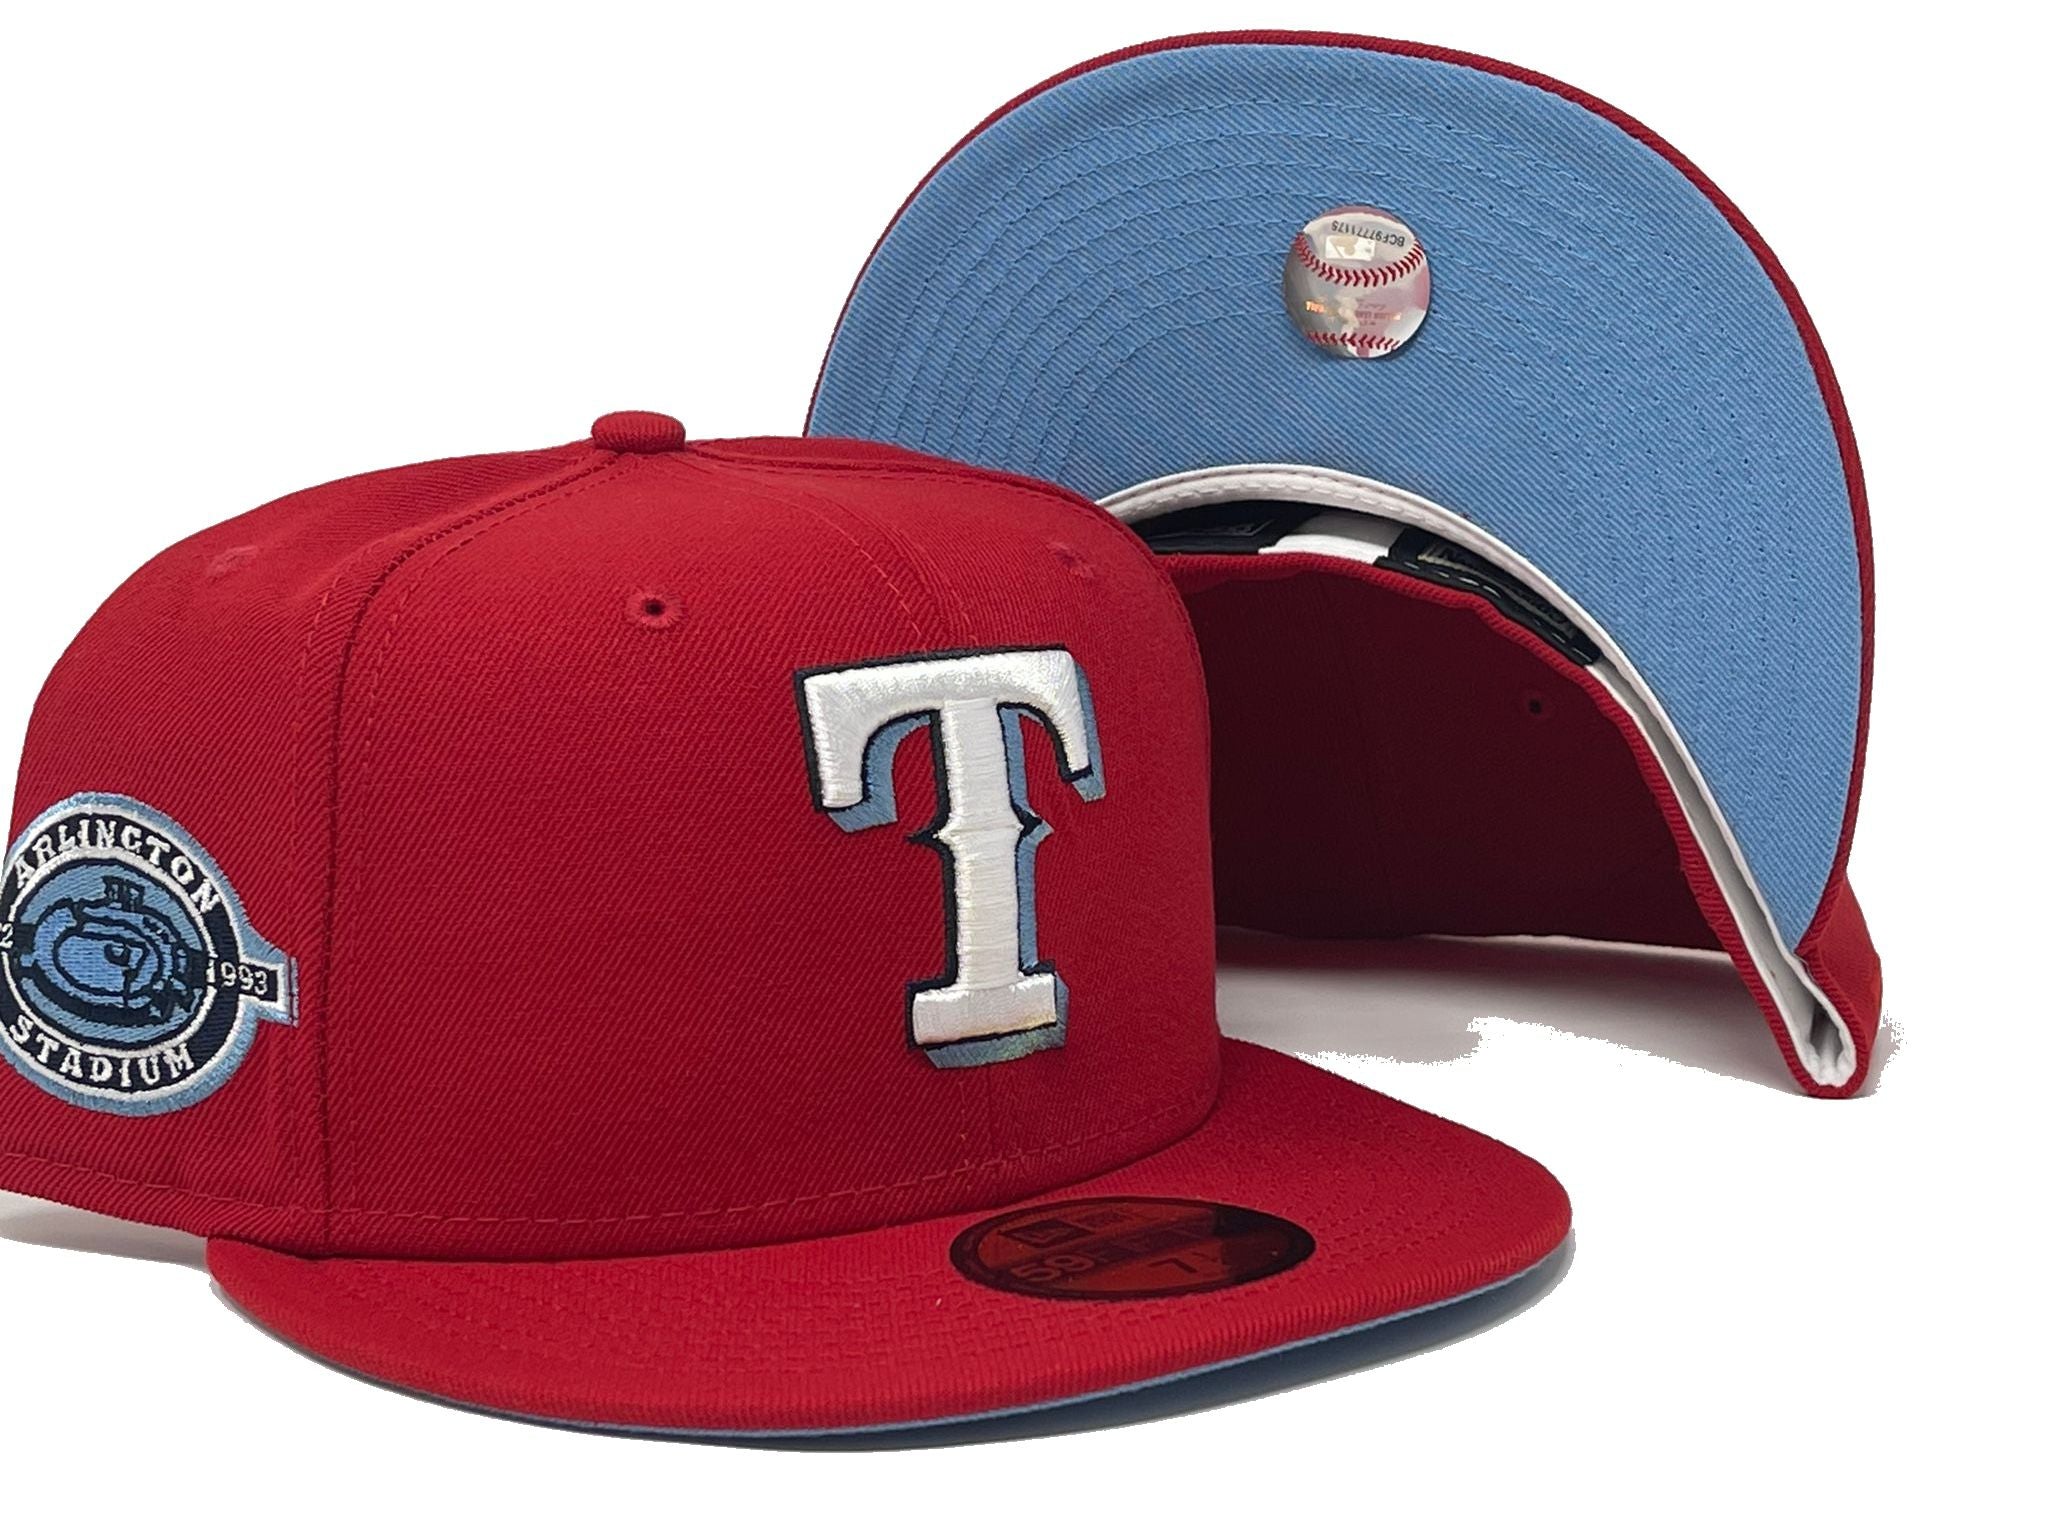 New Era Texas Rangers Fitted Hat Two-Tone Cream/Red Sz 7 3/8 (#9859)